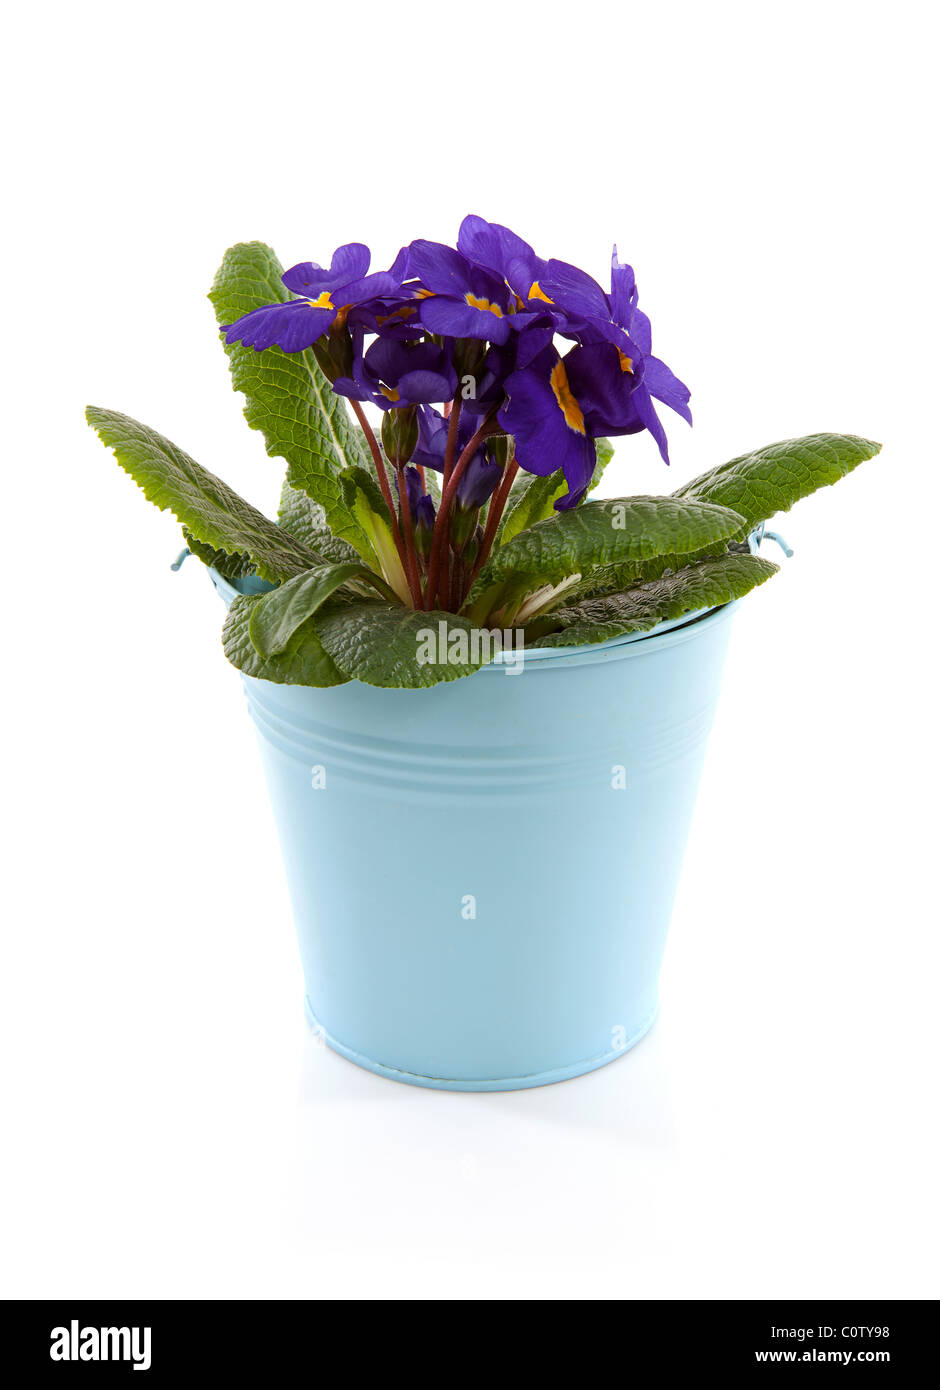 Purple Primula flowers in blue bucket isolated on white background Stock Photo